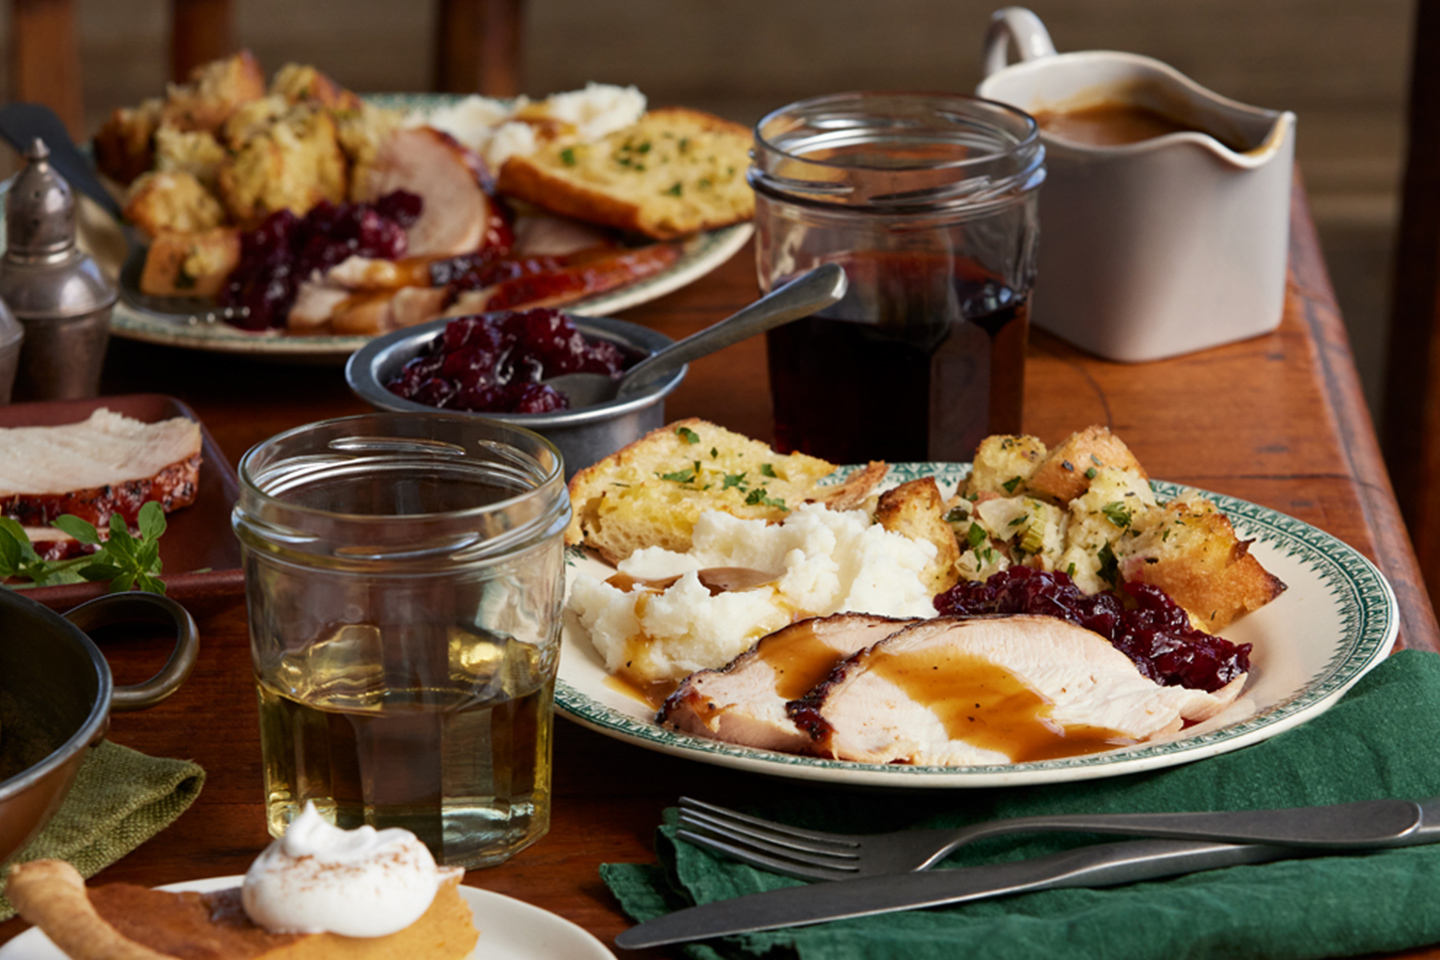 A festive holiday table with plates of sliced turkey, bread stuffing, mashed potatoes, and gravy.